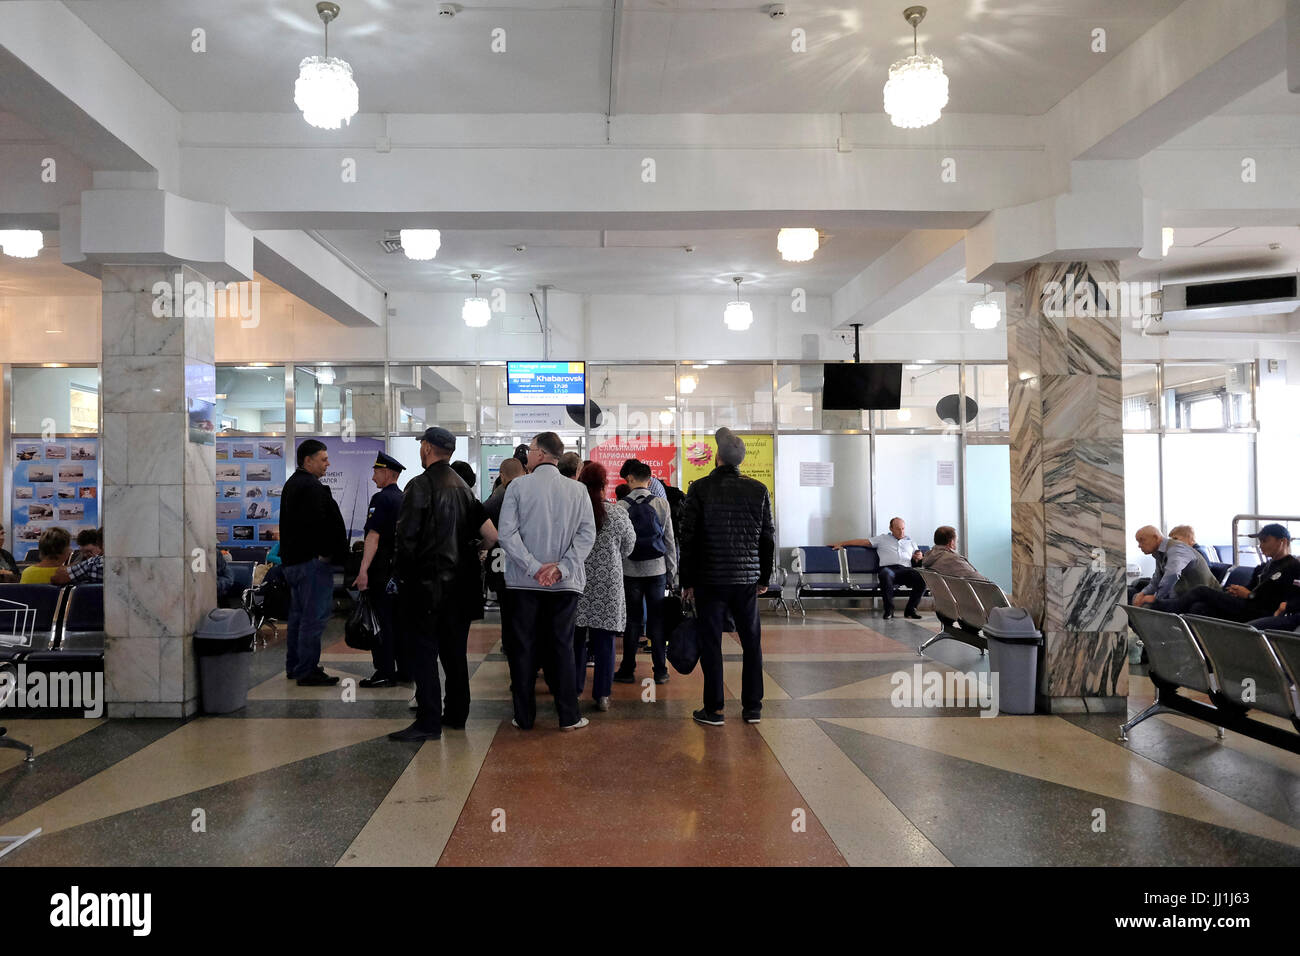 Passengers wait for their flight at the departure hall of Yuzhno-Sakhalinsk Airport also called Khomutovo in the city of Yuzhno-Sakhalinsk, in the island of Sakhalin, in the Pacific Ocean. Russia Stock Photo